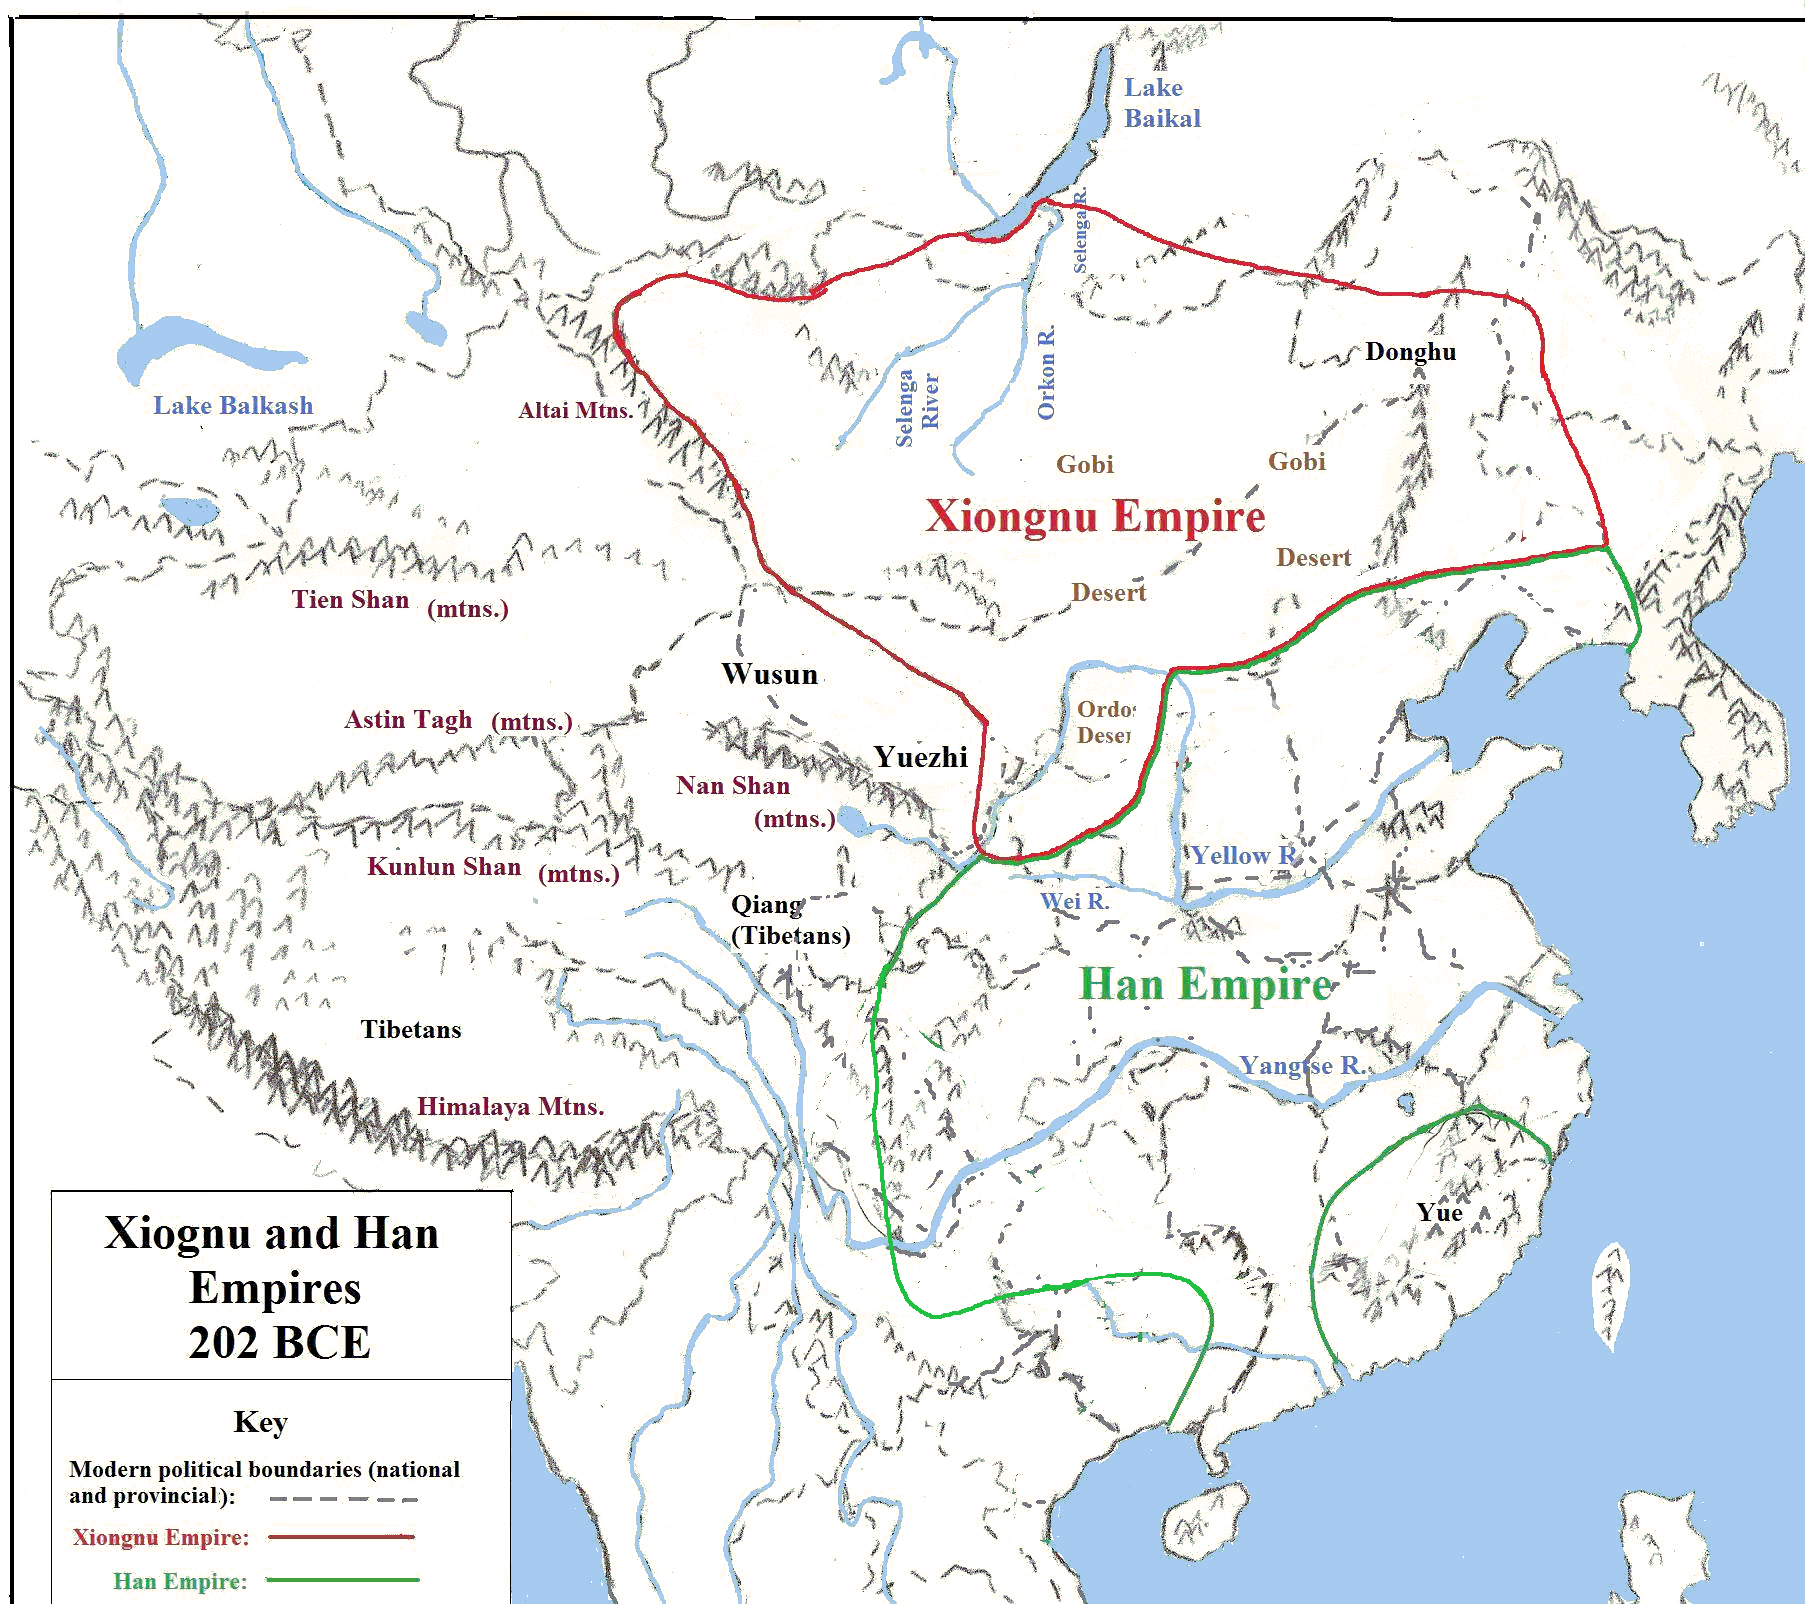 Hsiung-nu Empire in 202 BCE